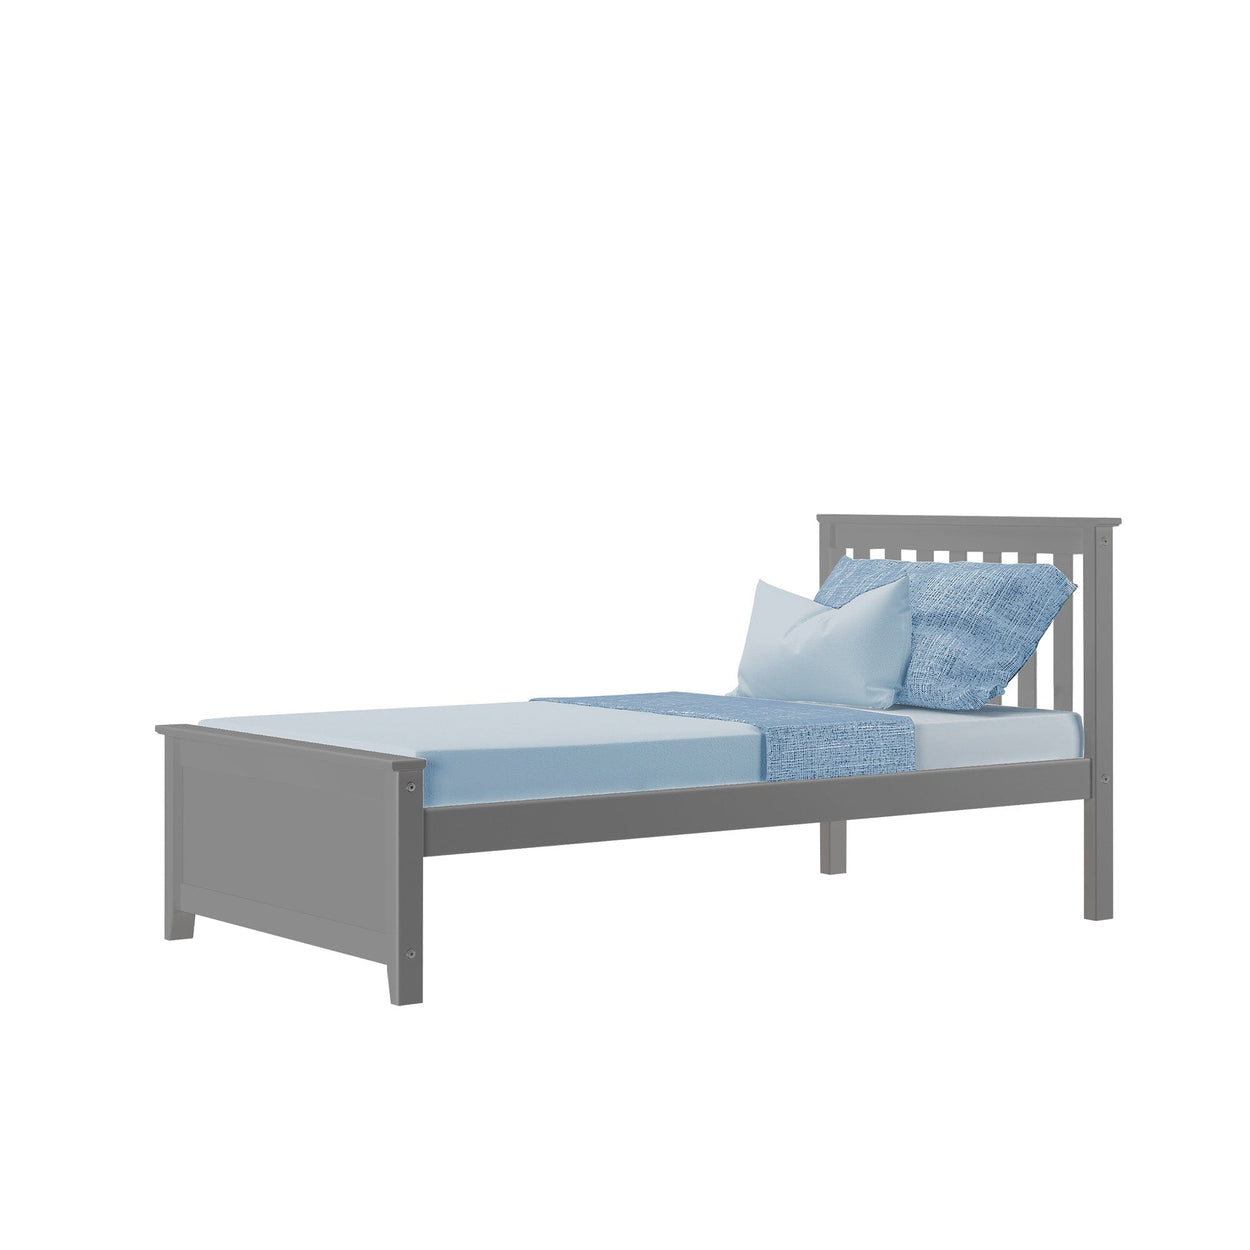 180210-121 : Kids Beds Classic Twin-Size Platform Bed, Grey